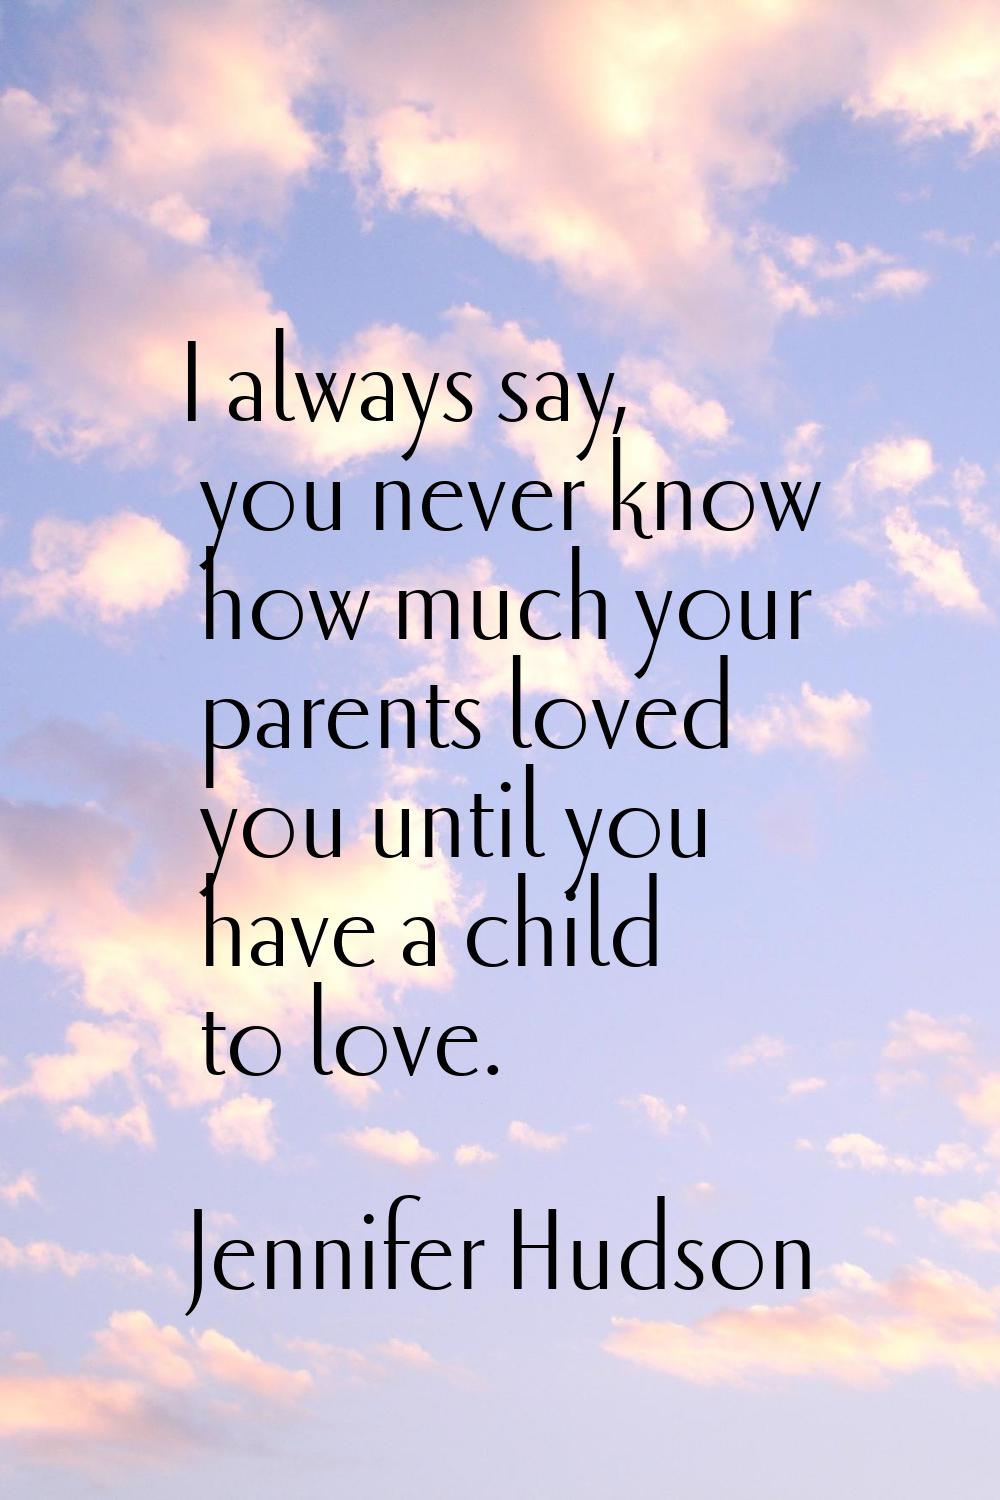 I always say, you never know how much your parents loved you until you have a child to love.